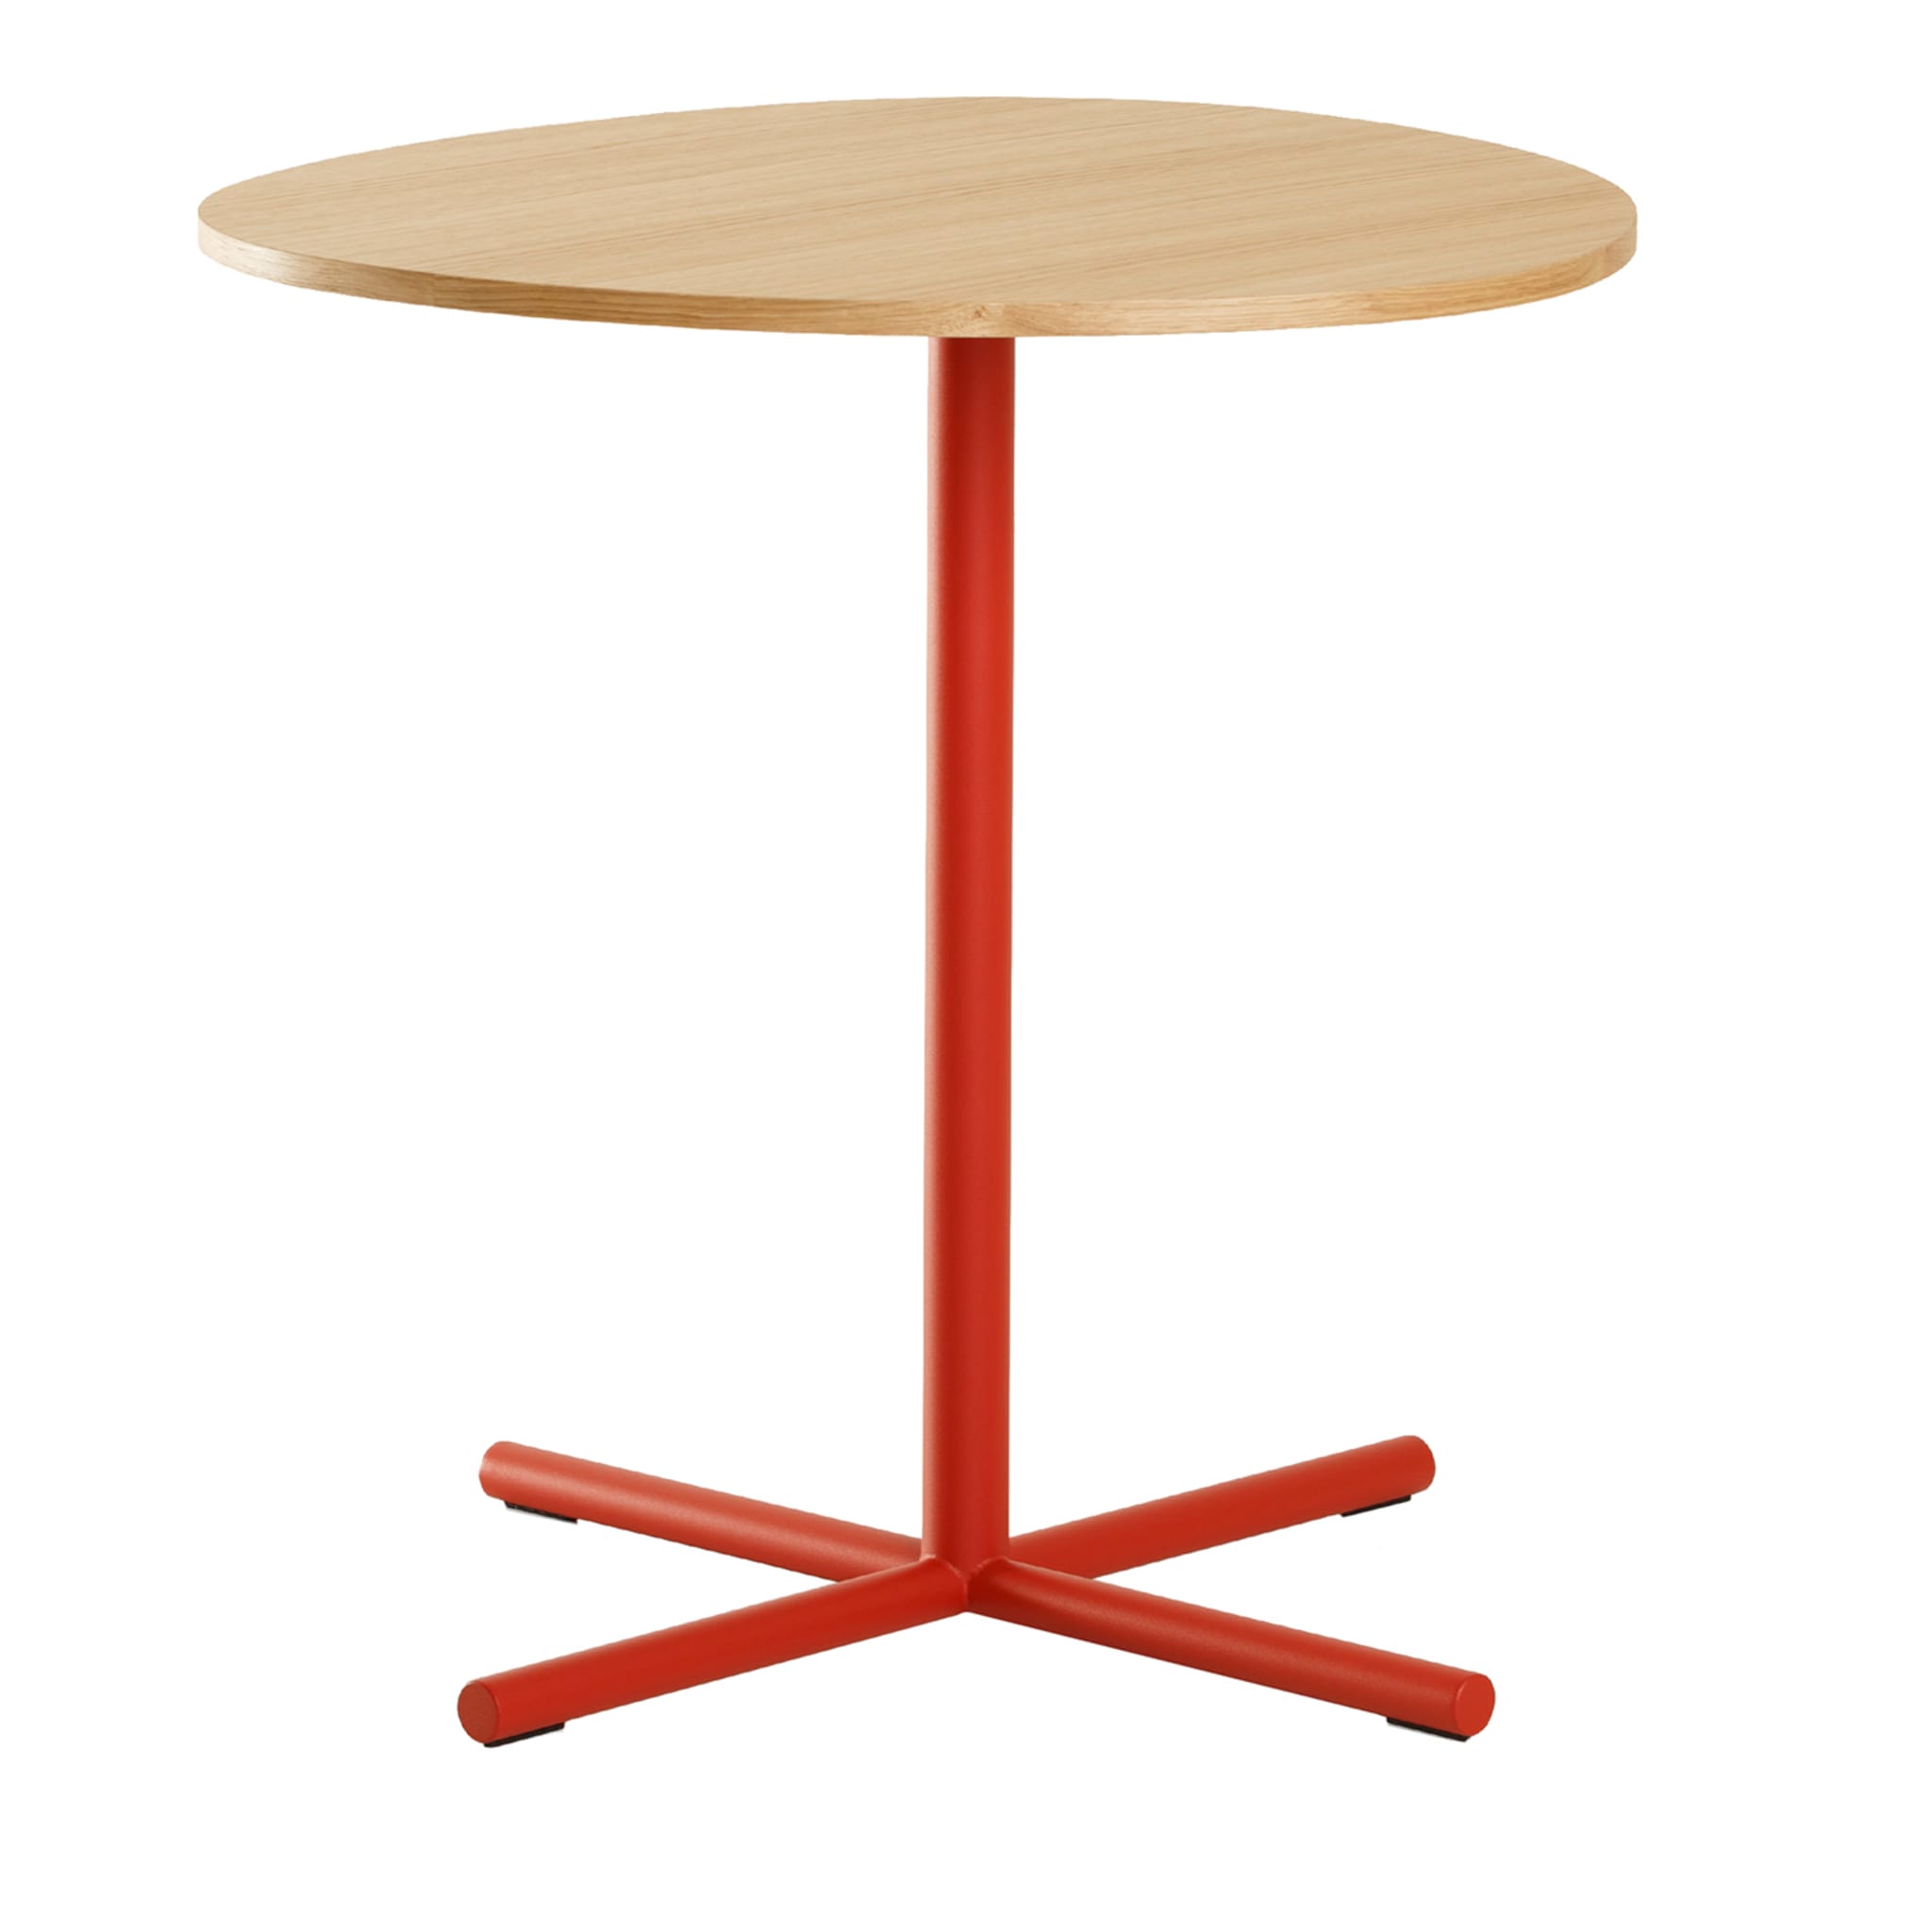 Table d'appoint rouge remarquable - Vue principale